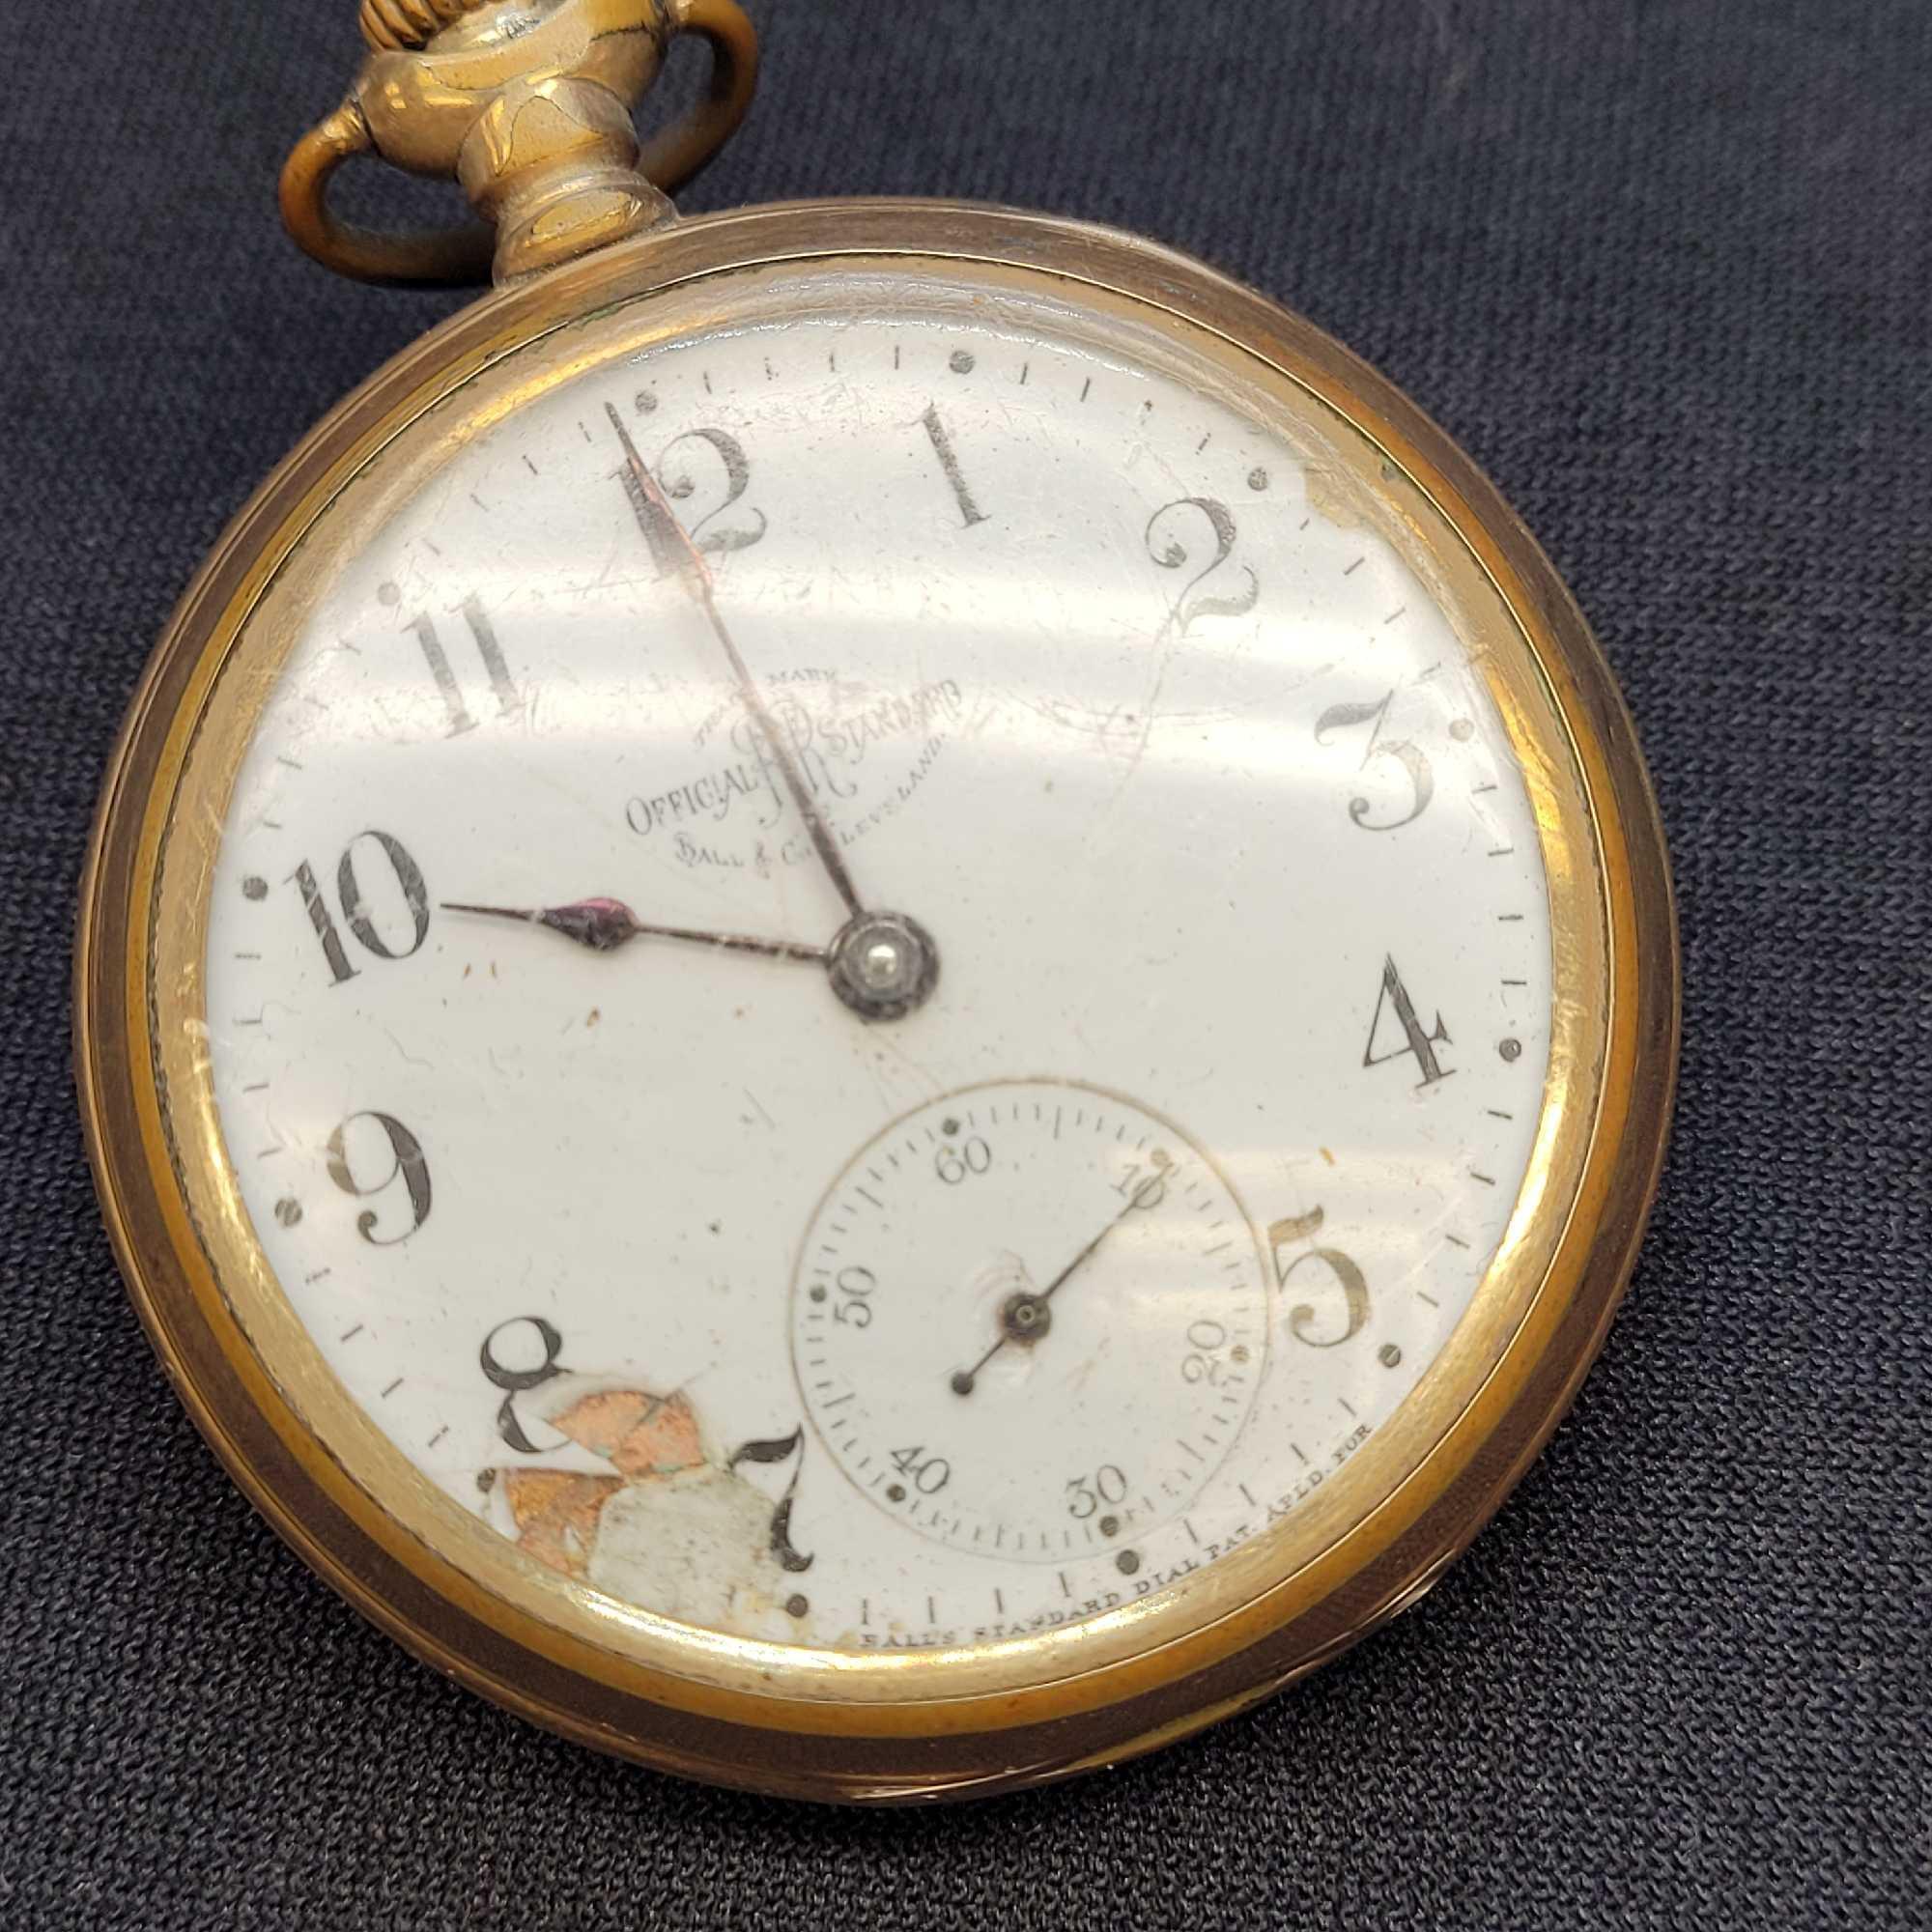 Pocket Watch Lot - American Waltham and Official Standard - 2 Units